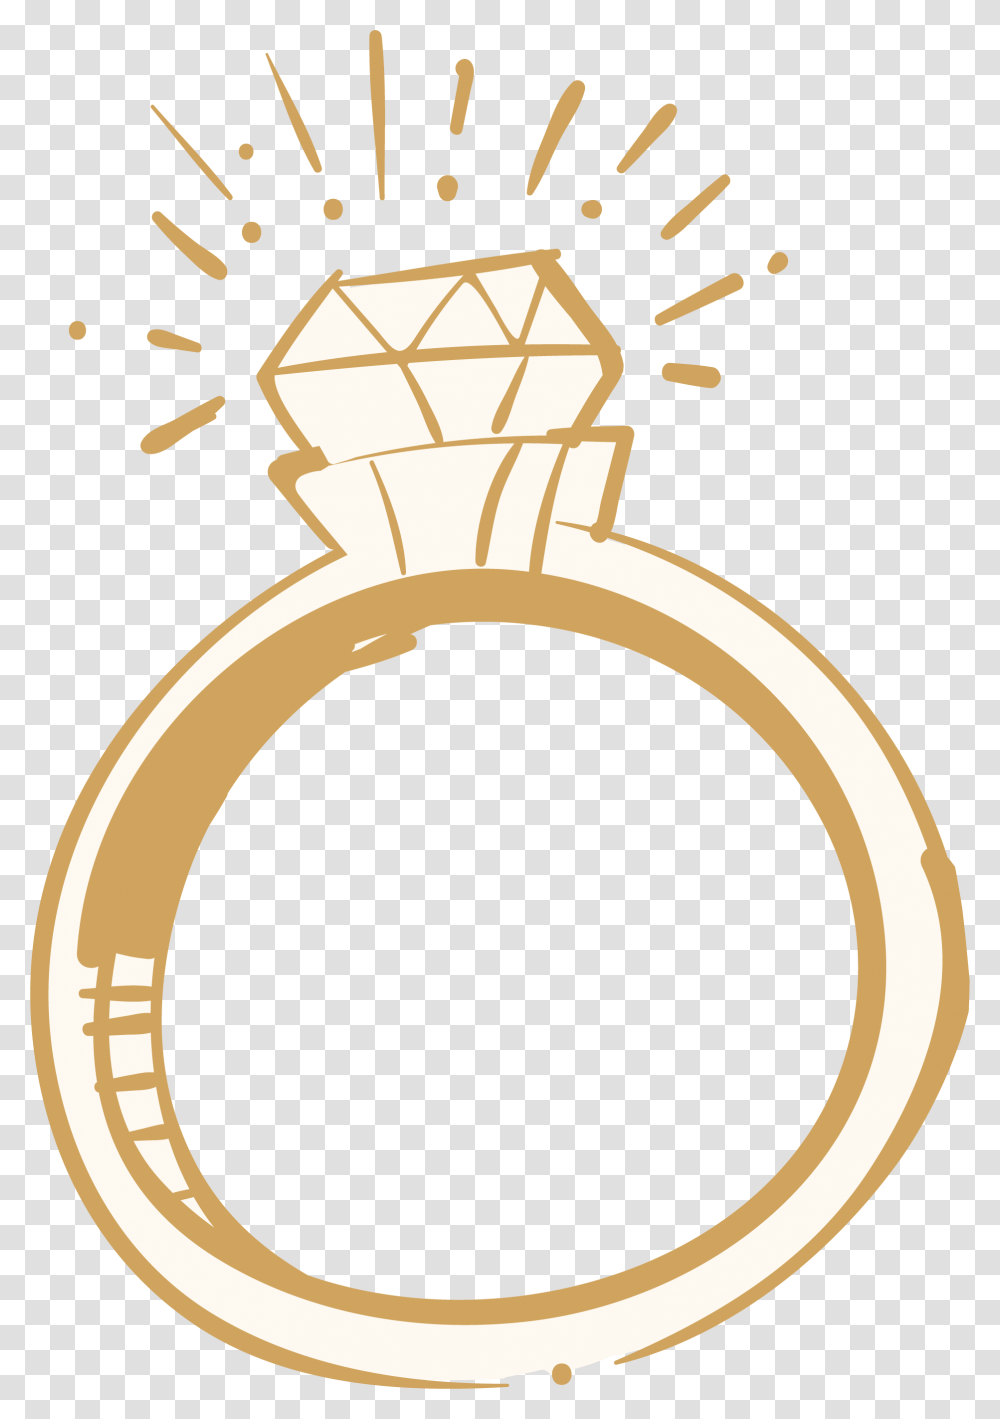 Ring Diamond Rings Sparkling Wedding Free Hd Image Circle, Rattle, Oval Transparent Png